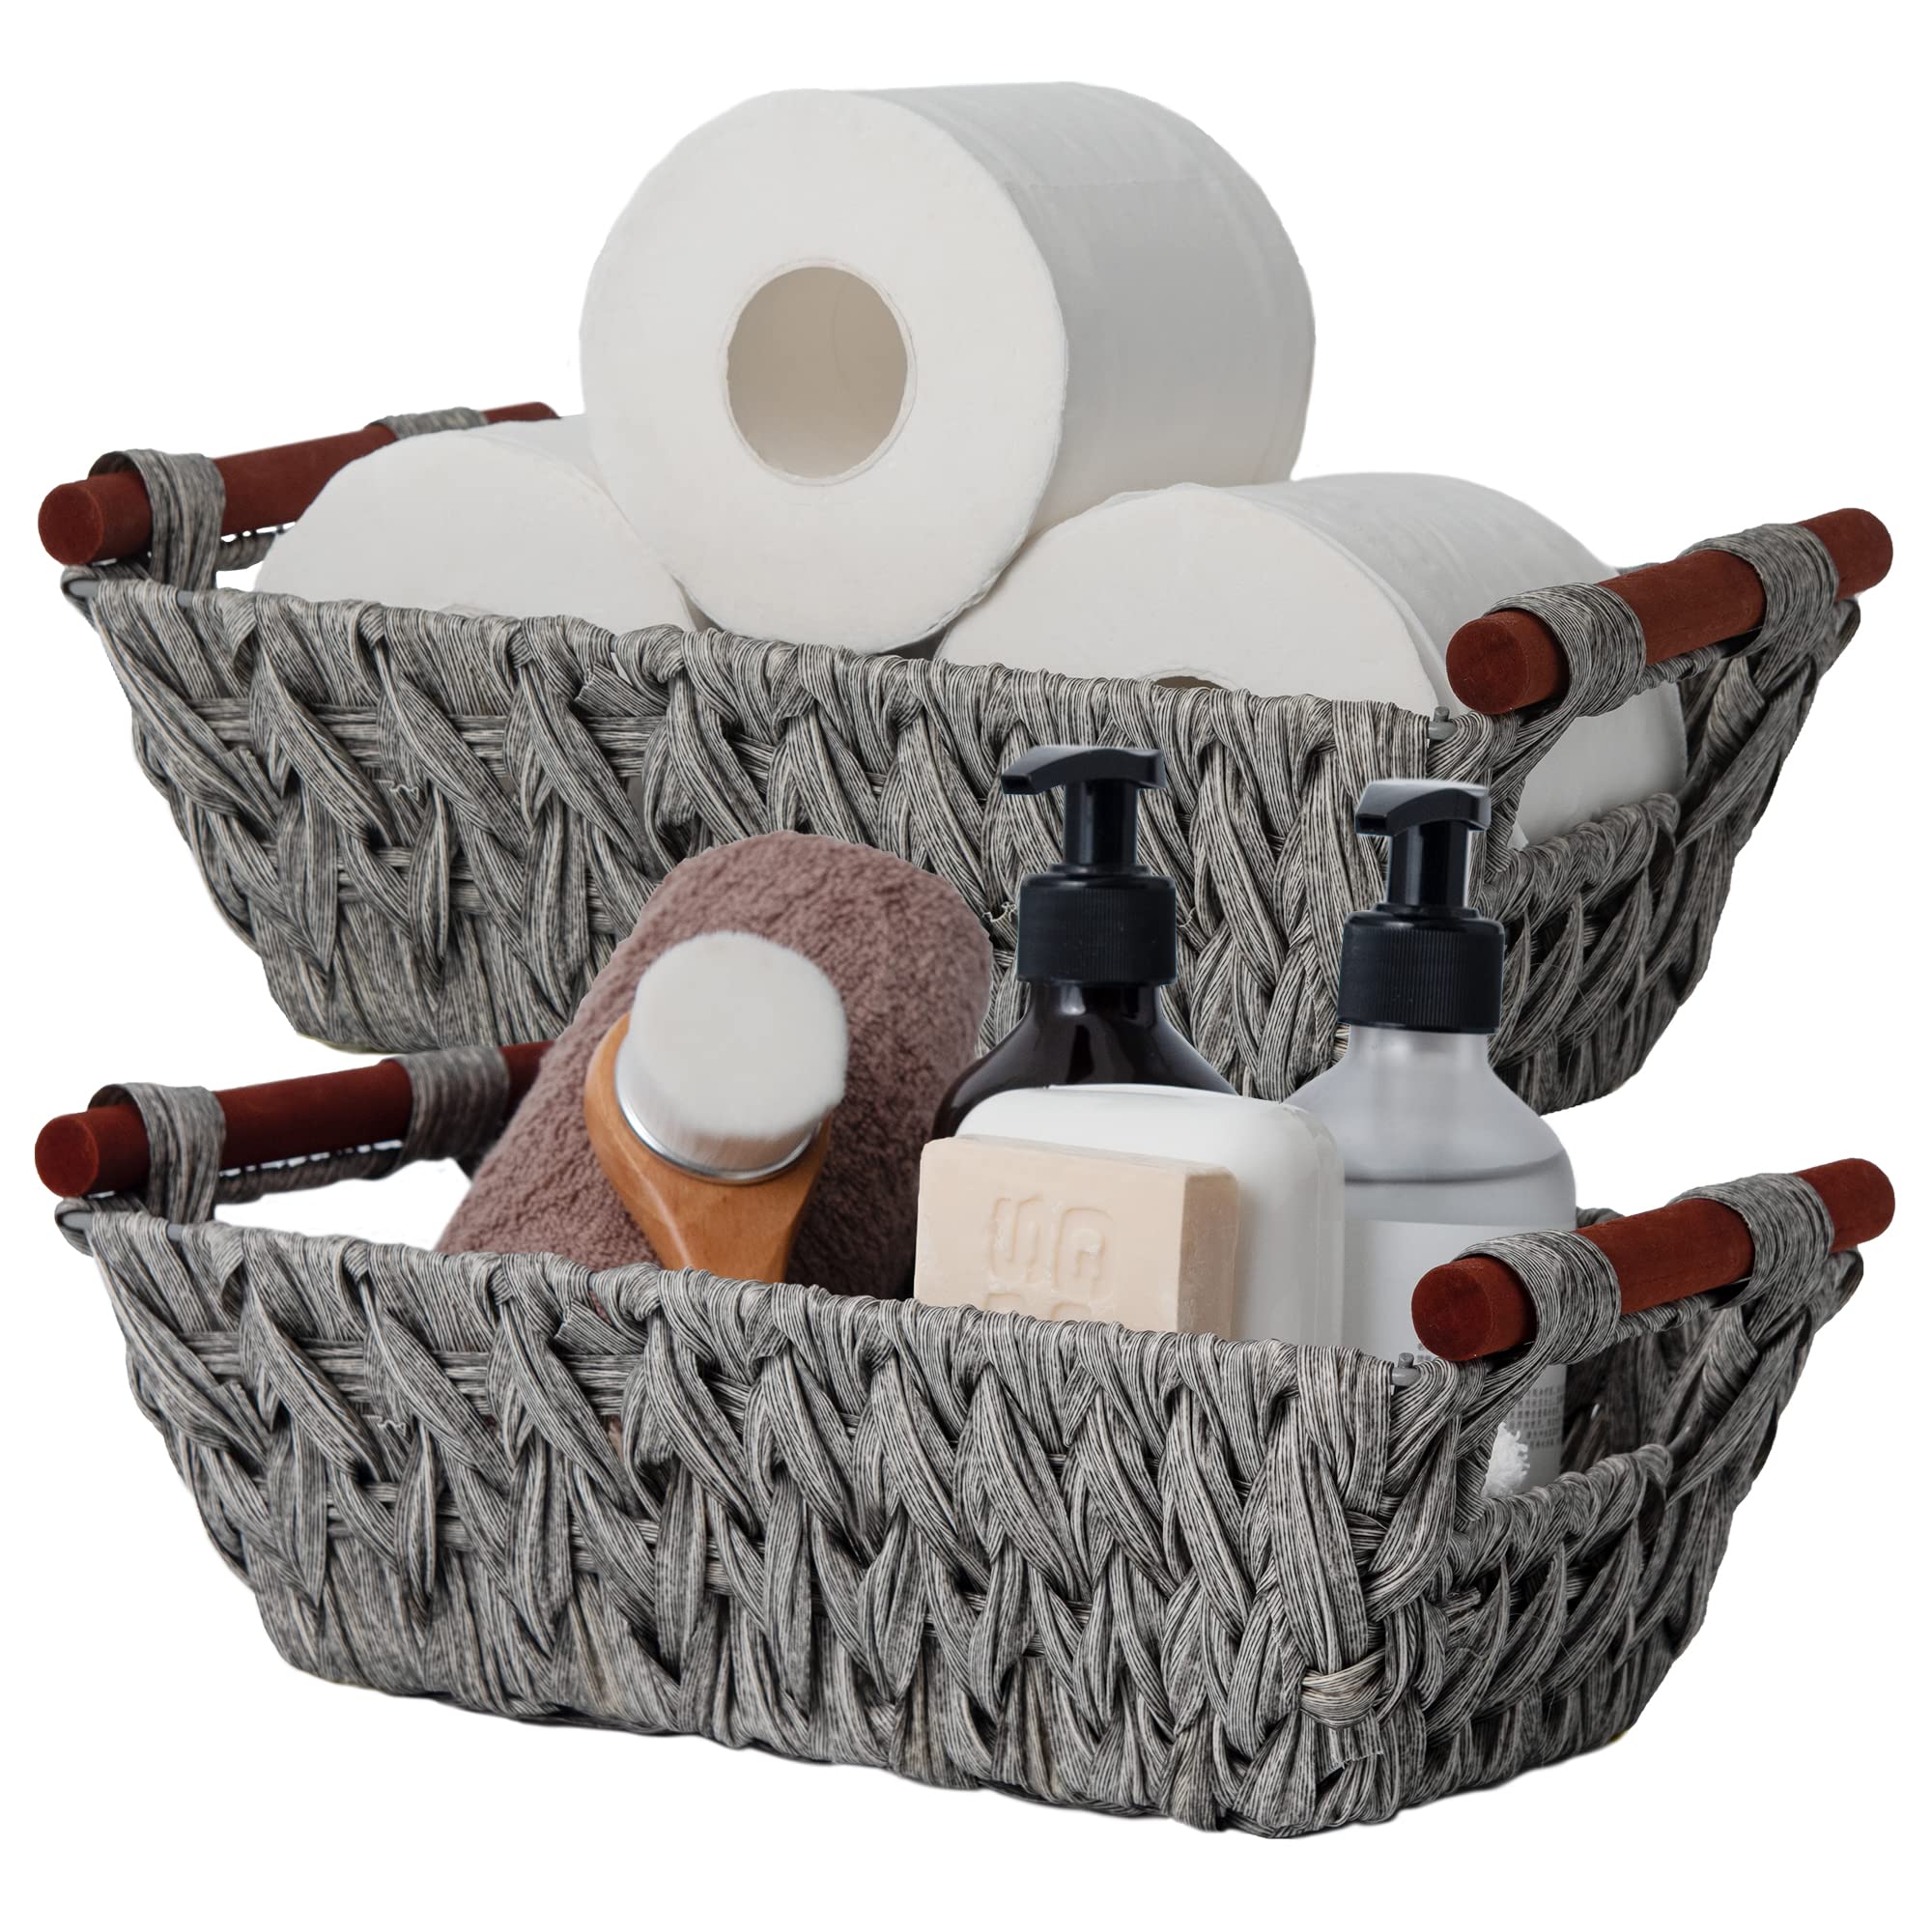 GRANNY SAYS Bundle of 3-Pack Closet Storage Boxes & 2-Pack Wicker Storage Baskets for Shelves